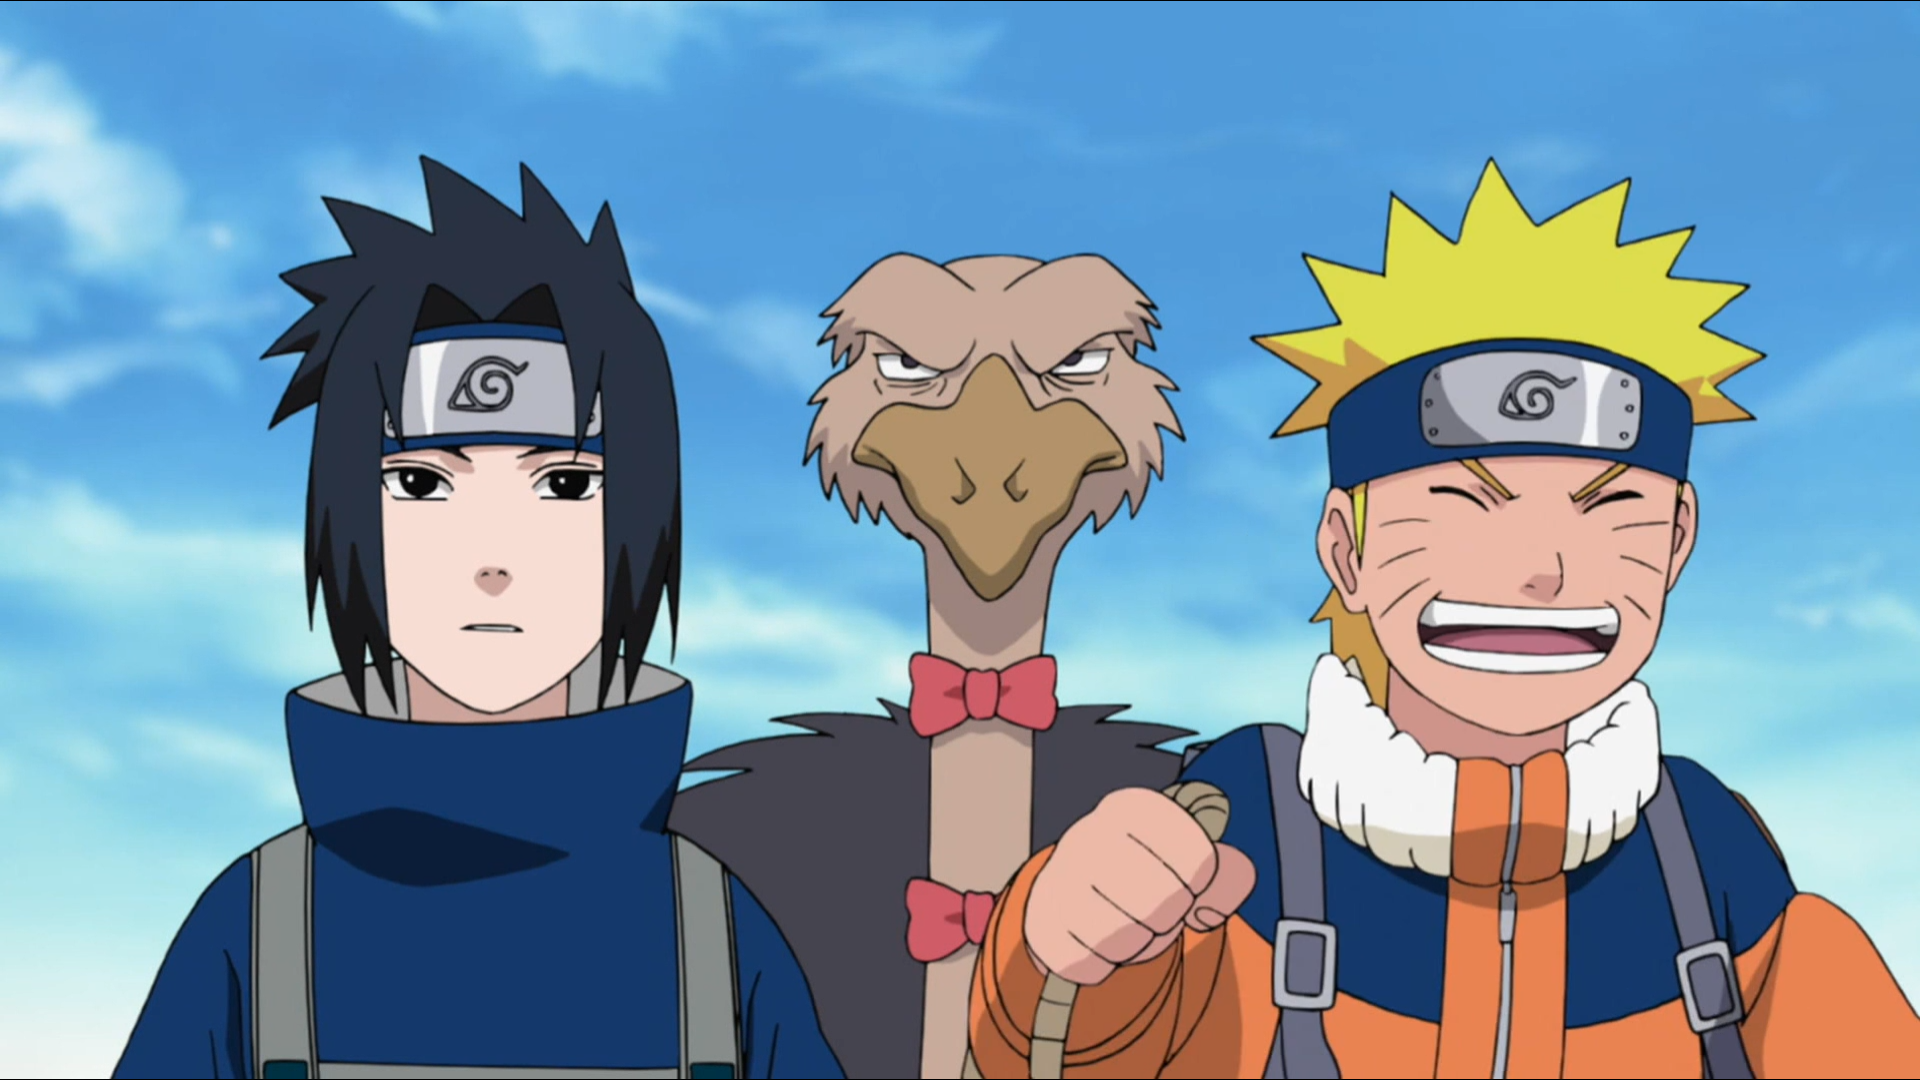 Condor the Ninja Ostrich prepares to break free from the captivity enforced by Sasuke and Naruto in a scene from the Naruto Shippuden TV anime.